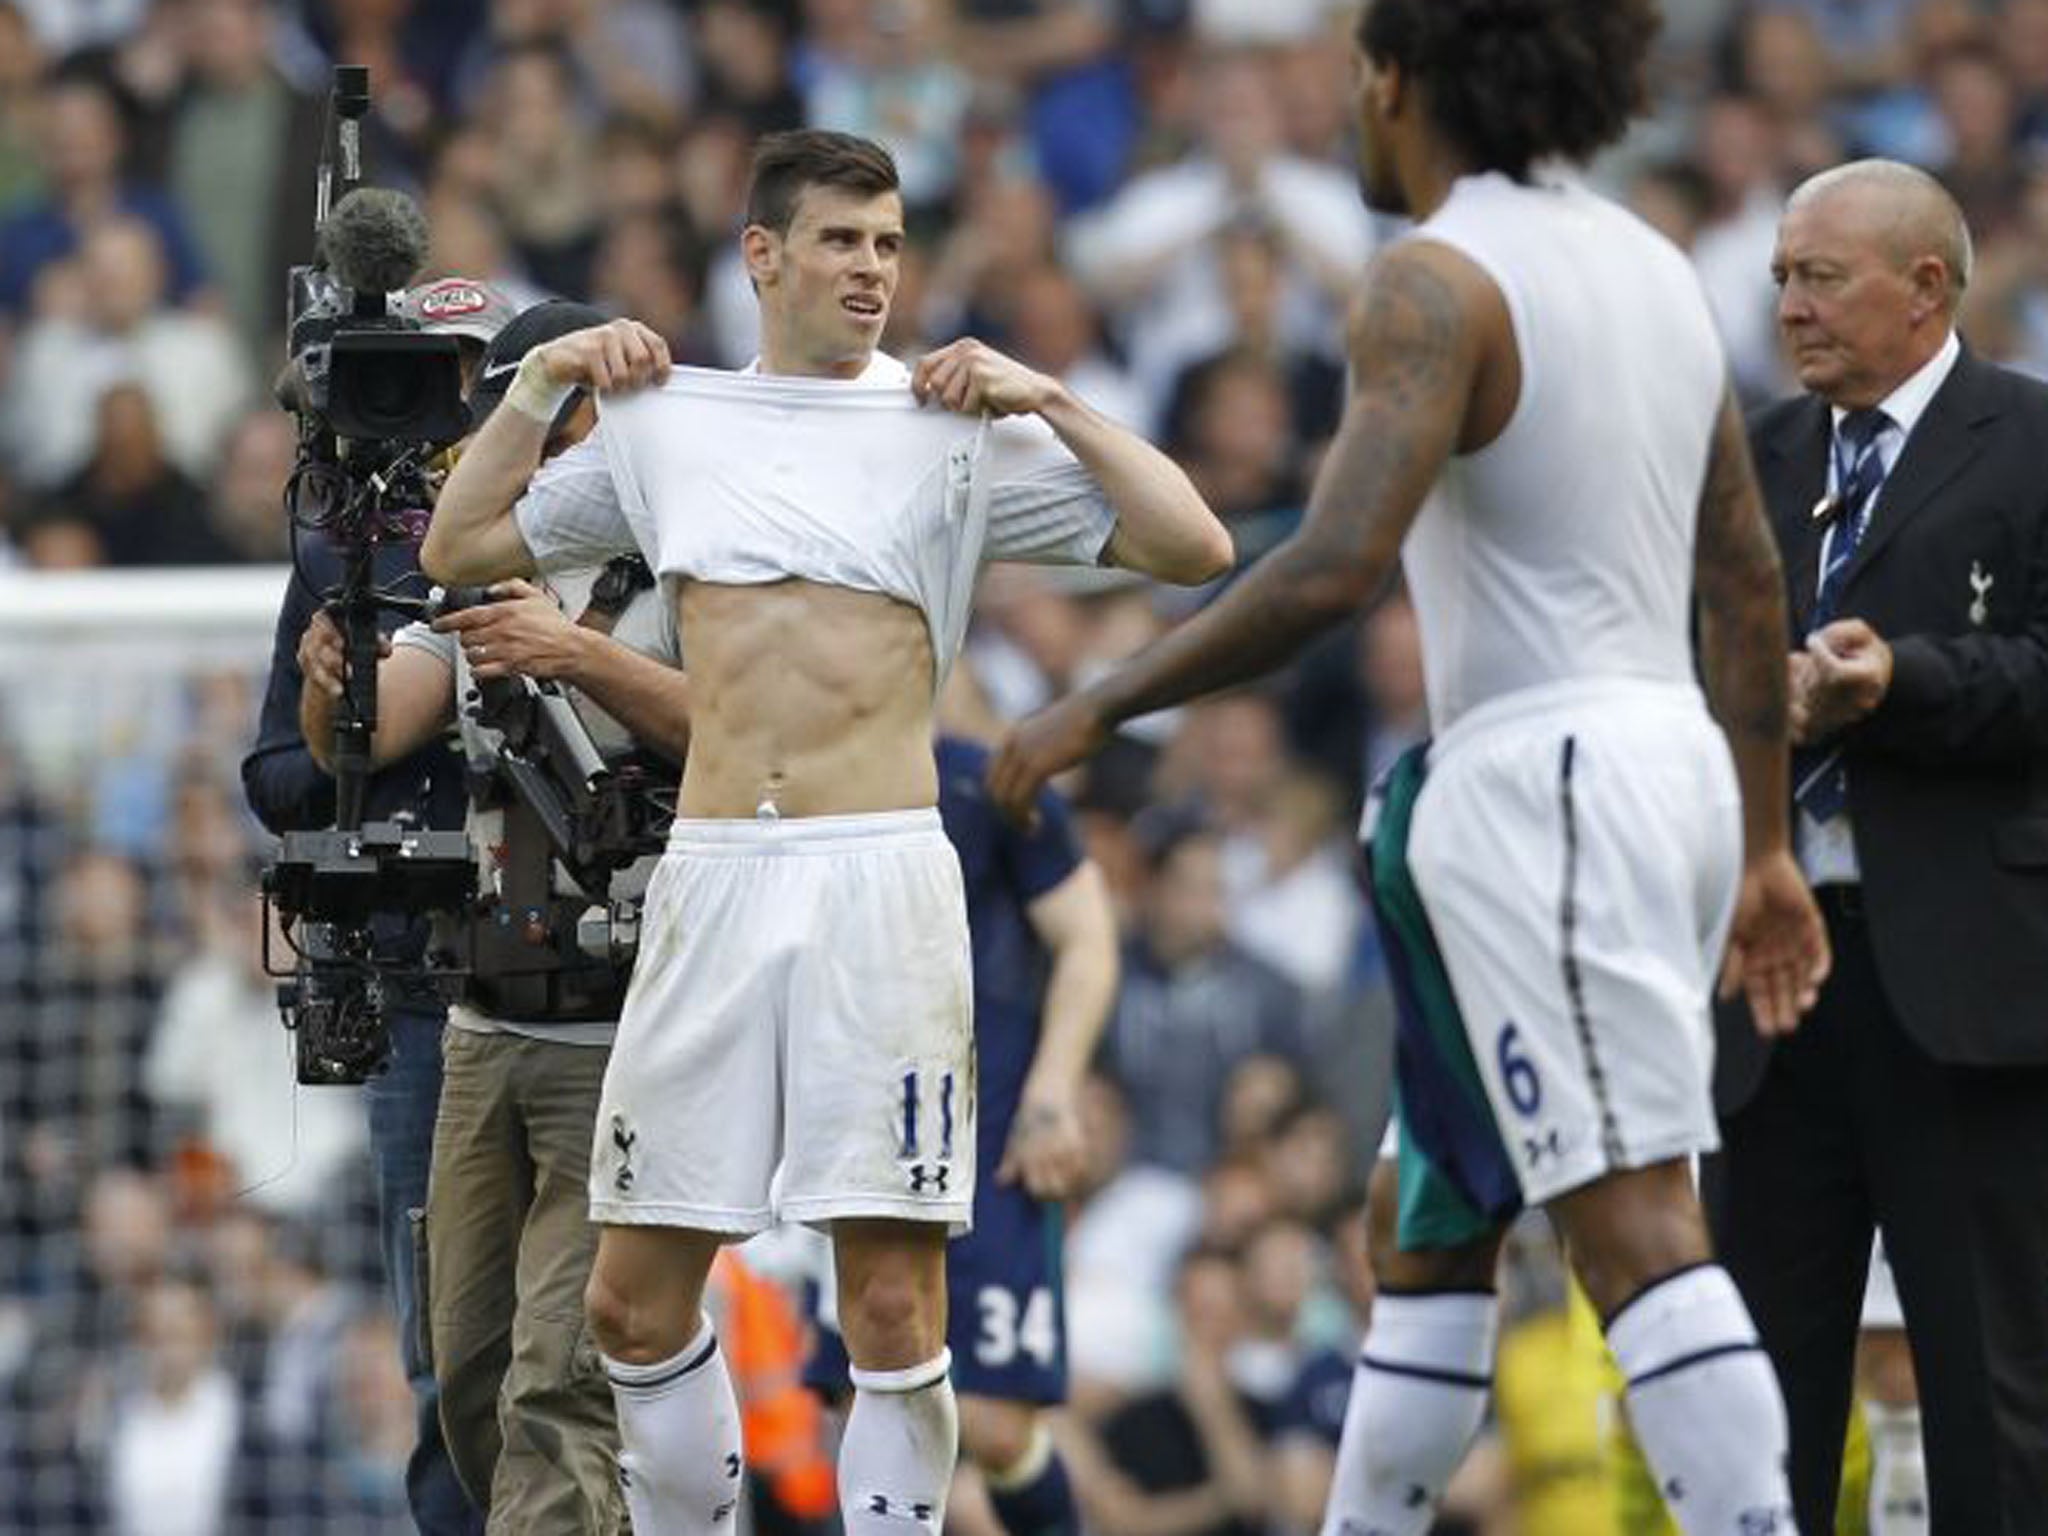 Luring Gareth Bale Away From Tottenham Will Be Very Very Difficult Insists Andre Villas Boas